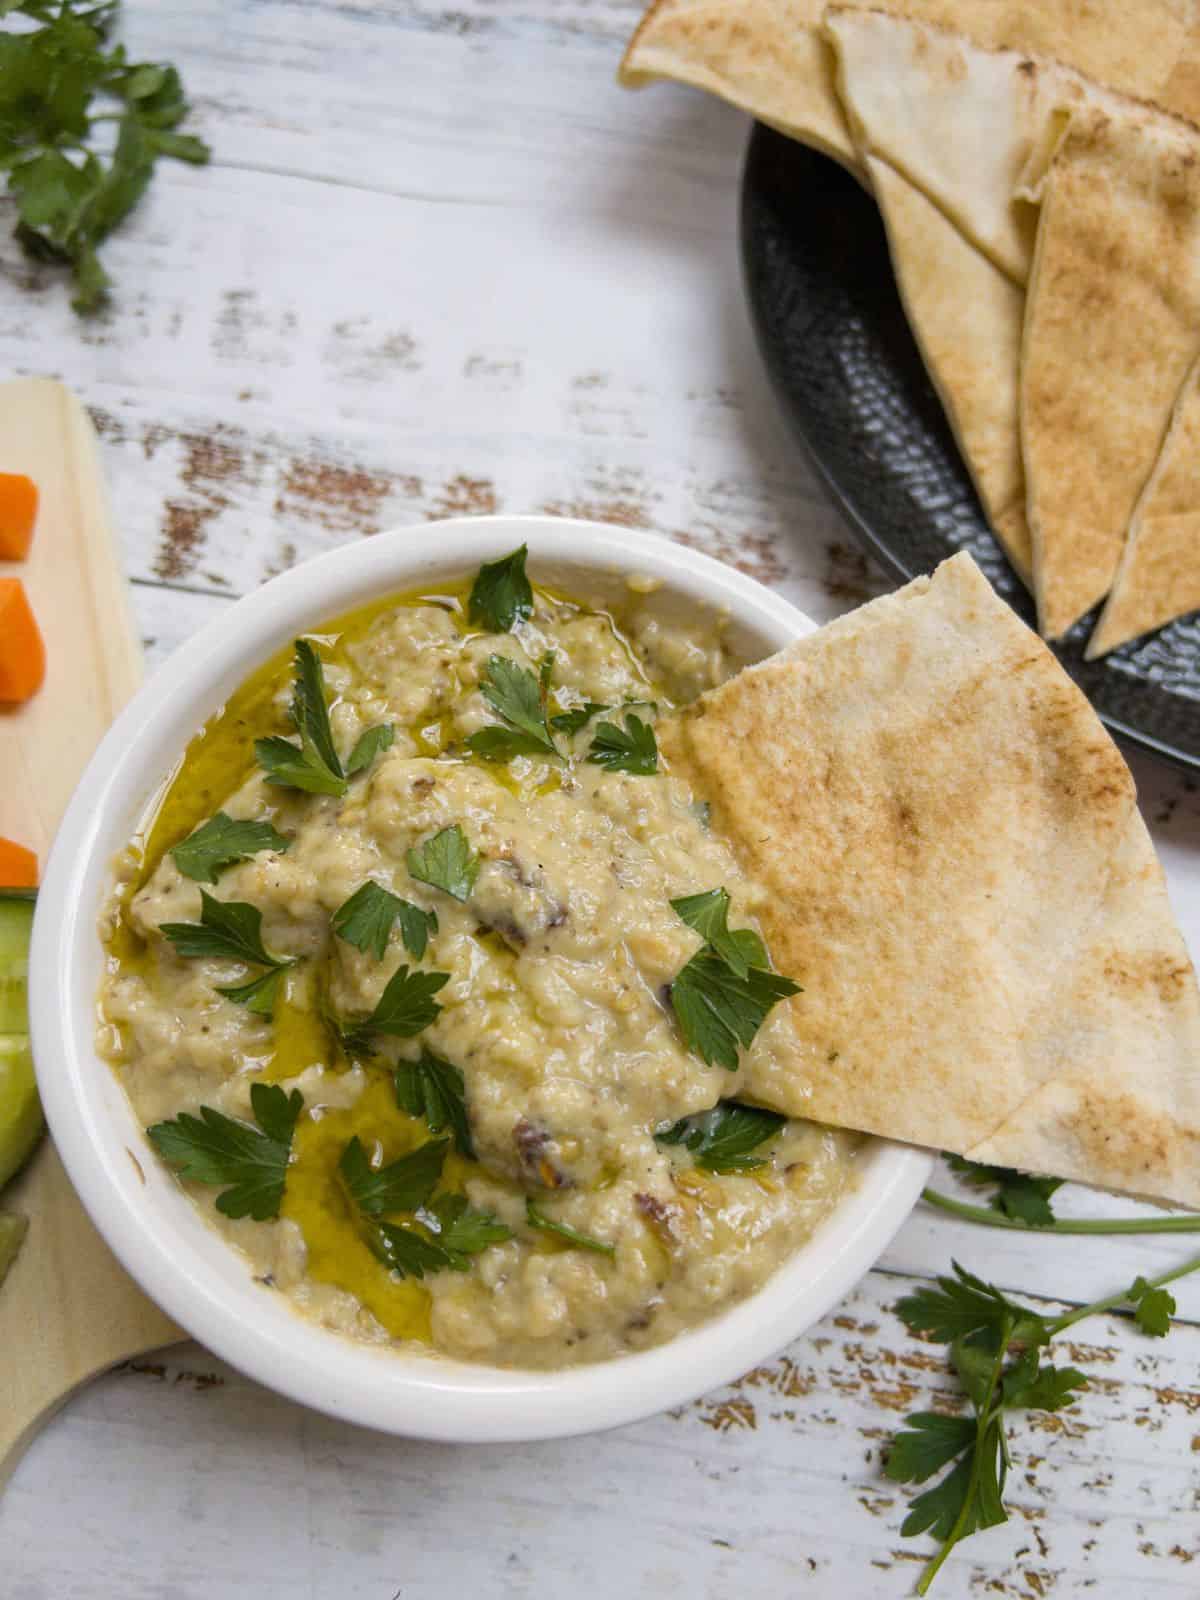 A bowl of baba ganoush with a triangle of pitta bread in it. A plate of pitta sits in the background.